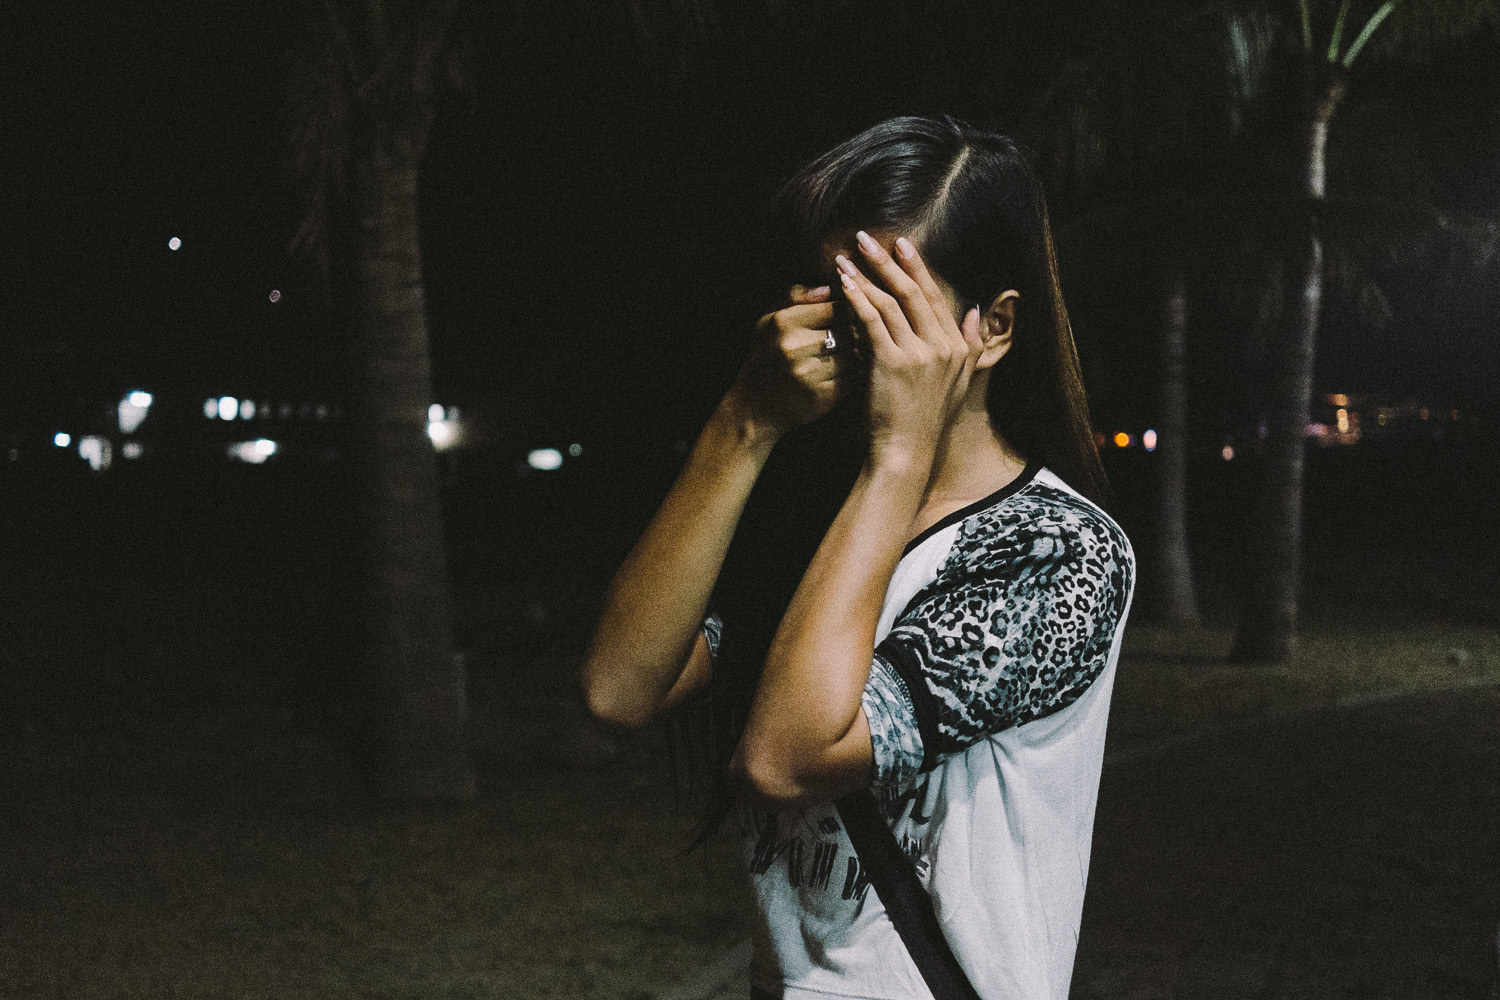 A young trans woman in Olongapo City, Philippines at night, covering her face with her hands while posing for a picture.